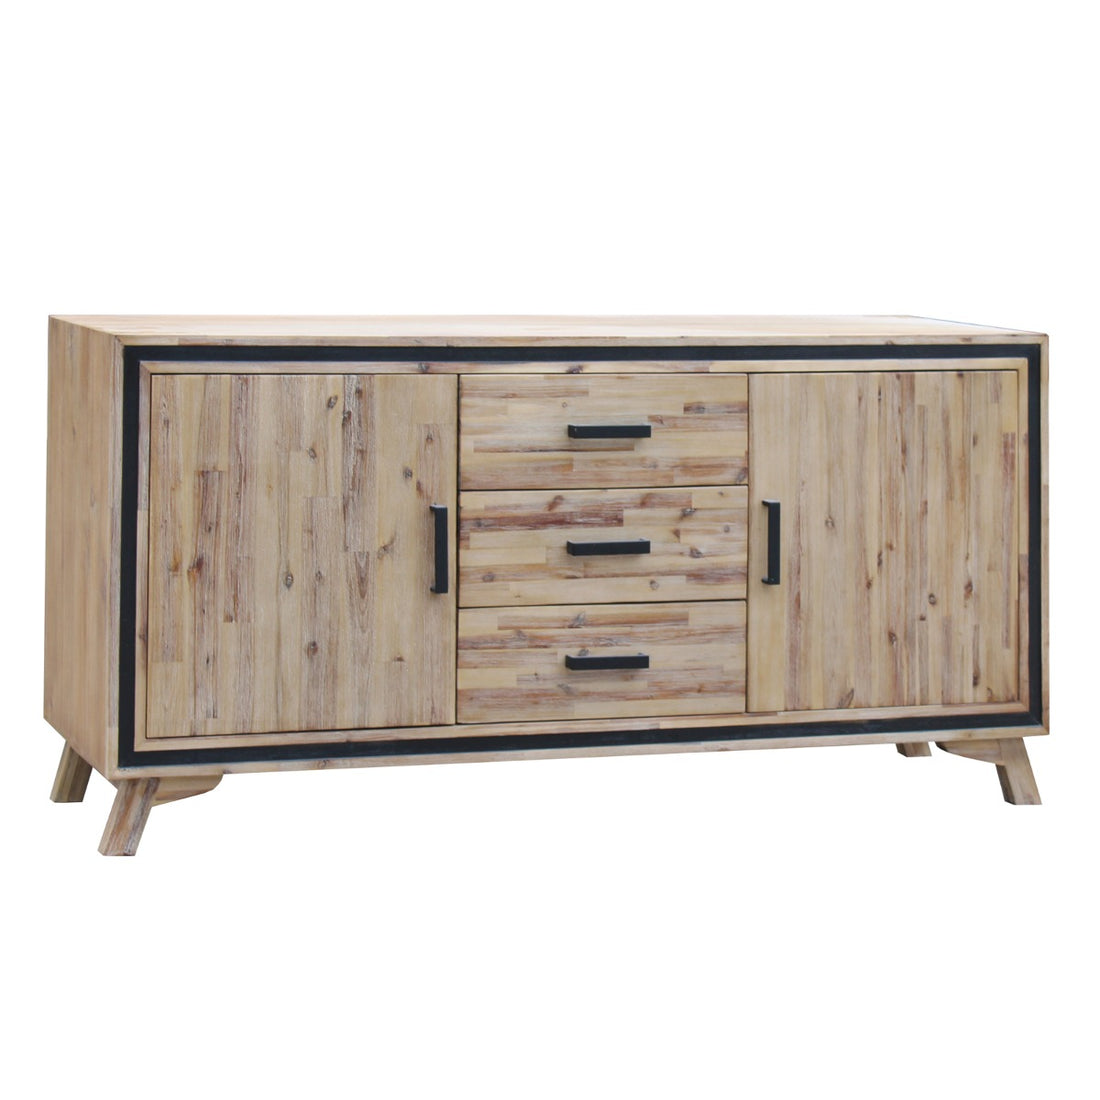 Wooden Sideboard with Storage Cabinet and Drawers